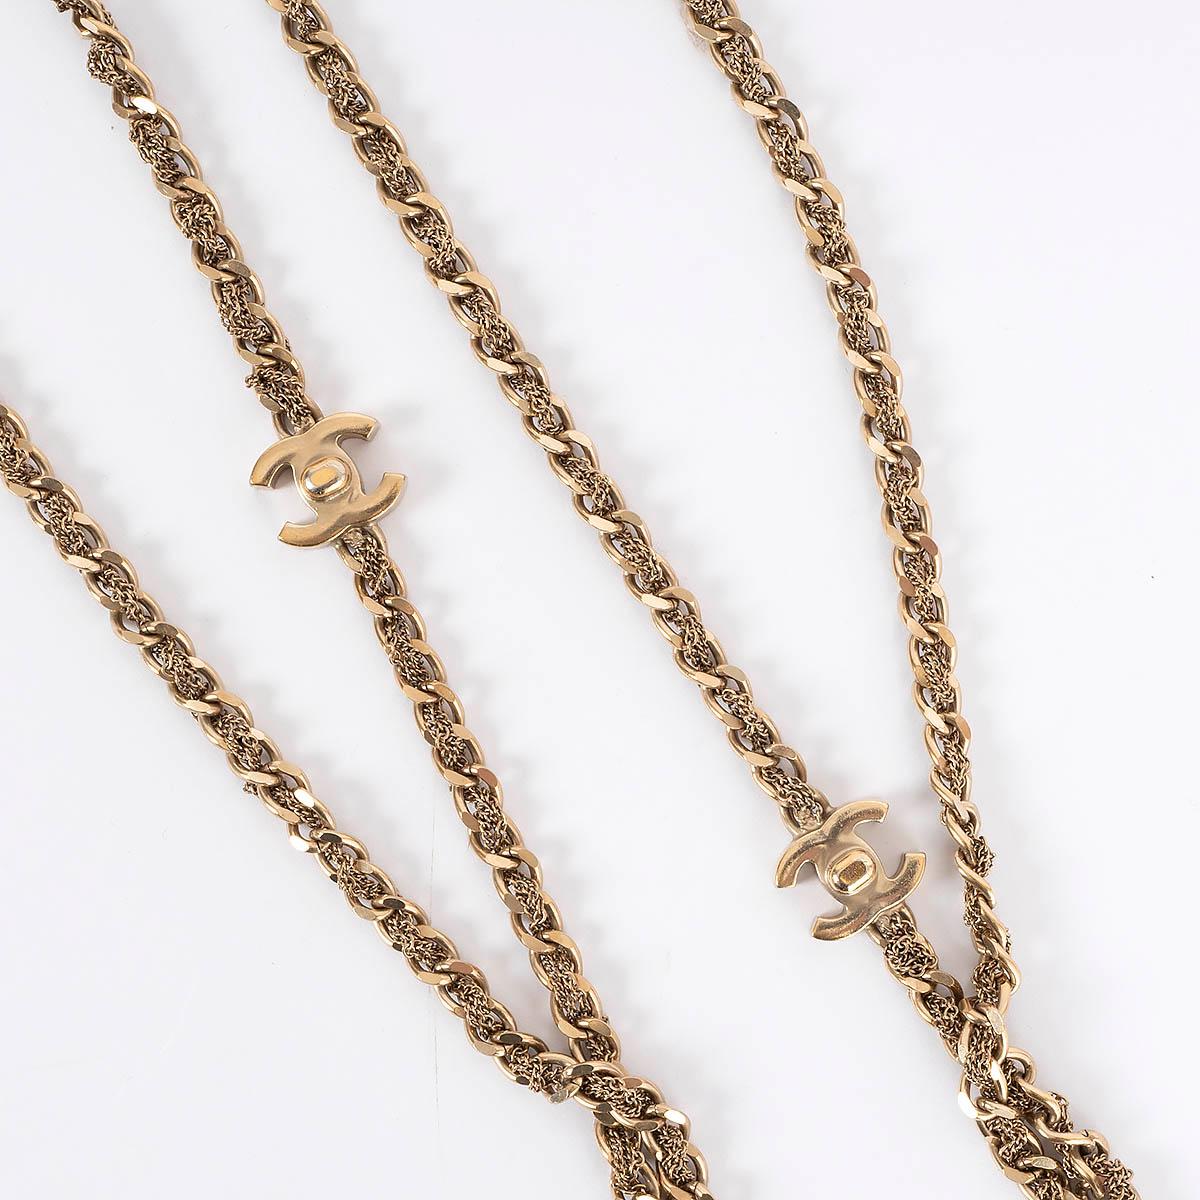 Women's CHANEL gold-tone 2012 12P DOUBLE CHAIN TURNLOCK Necklace For Sale